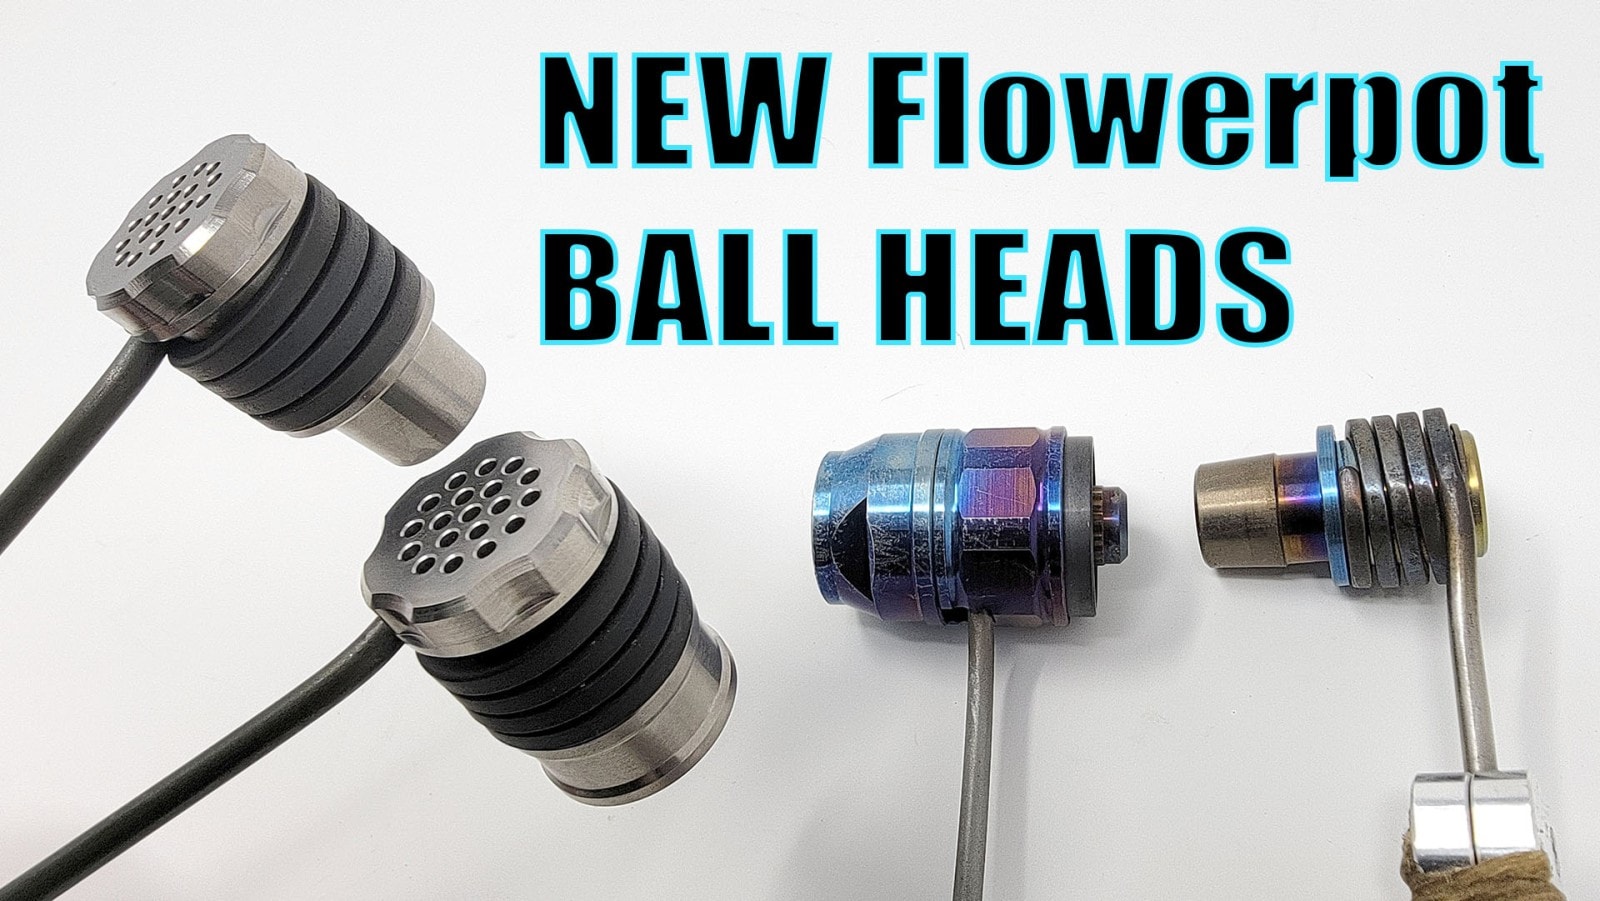 TWO new ball vape heads from Cannabis Hardware